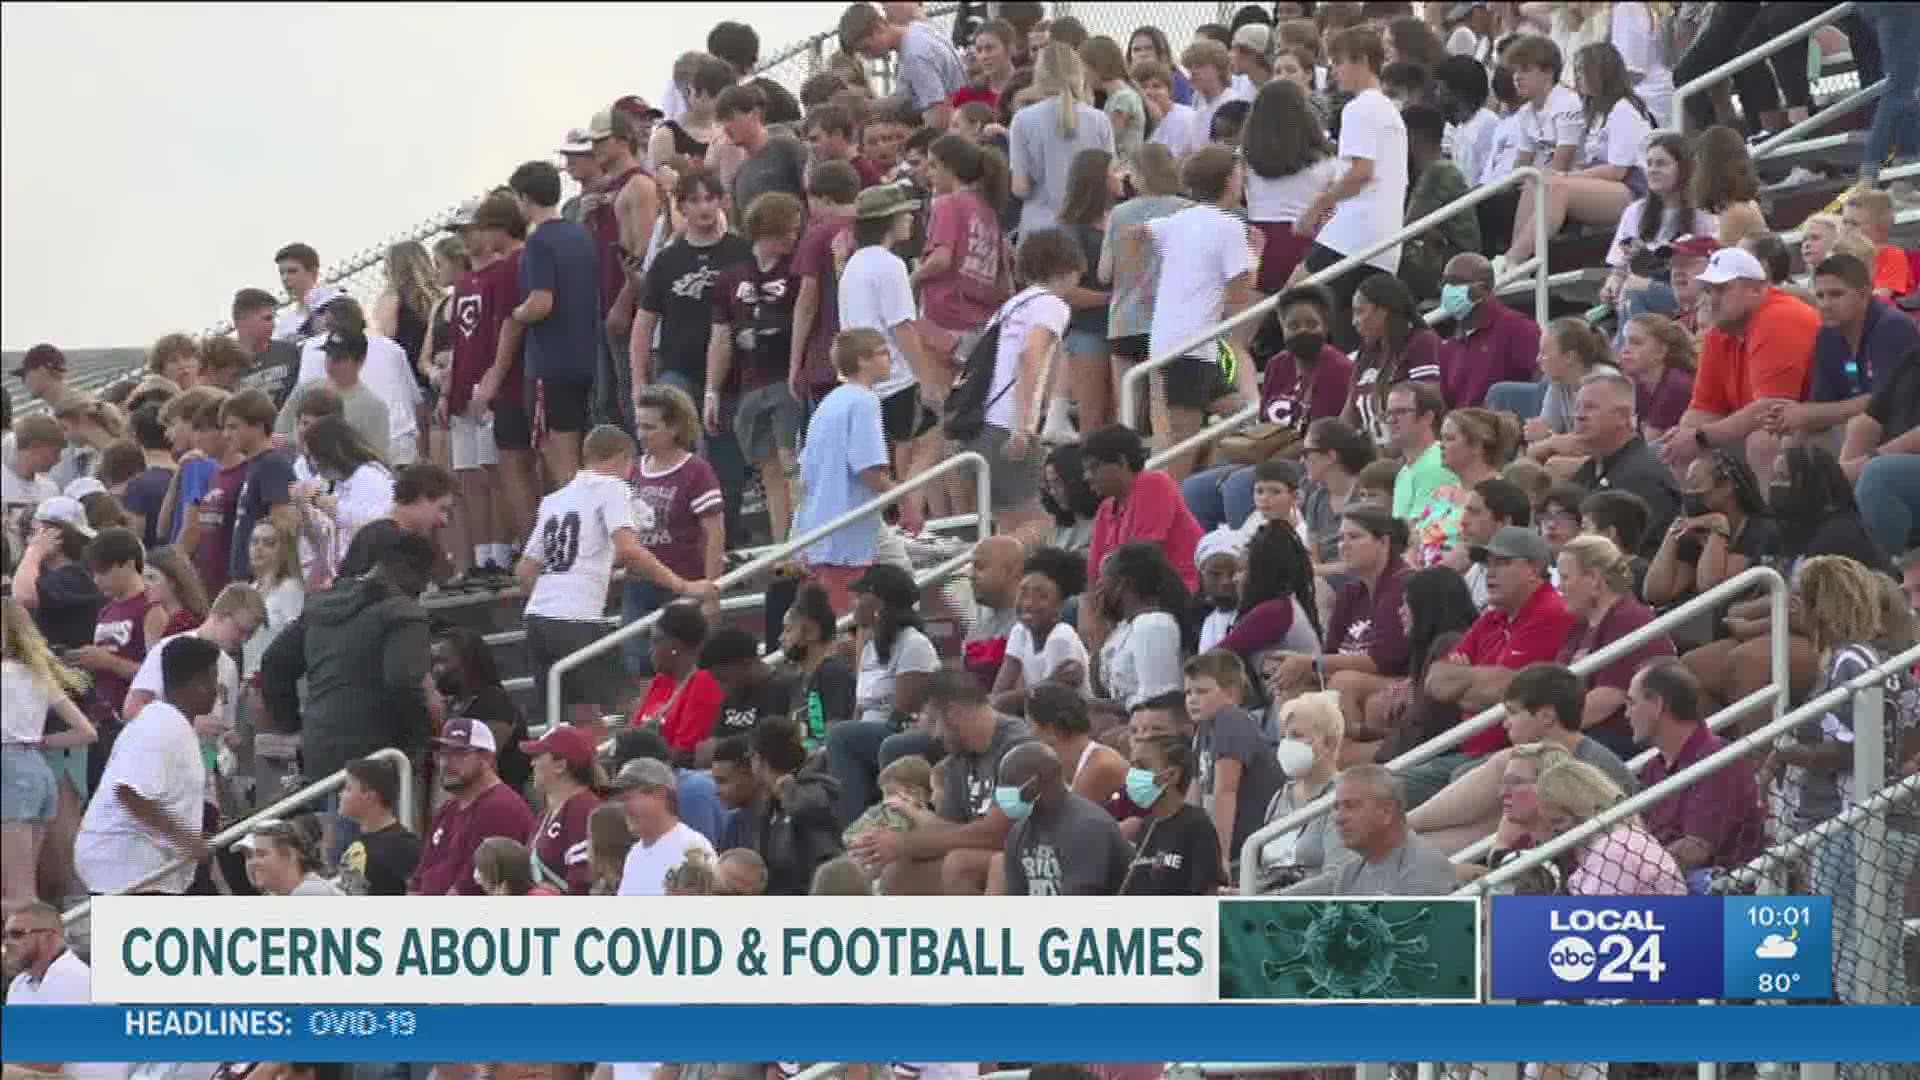 Wooddale forfeited over the number of positive COVID-19 tests at Collierville High School.